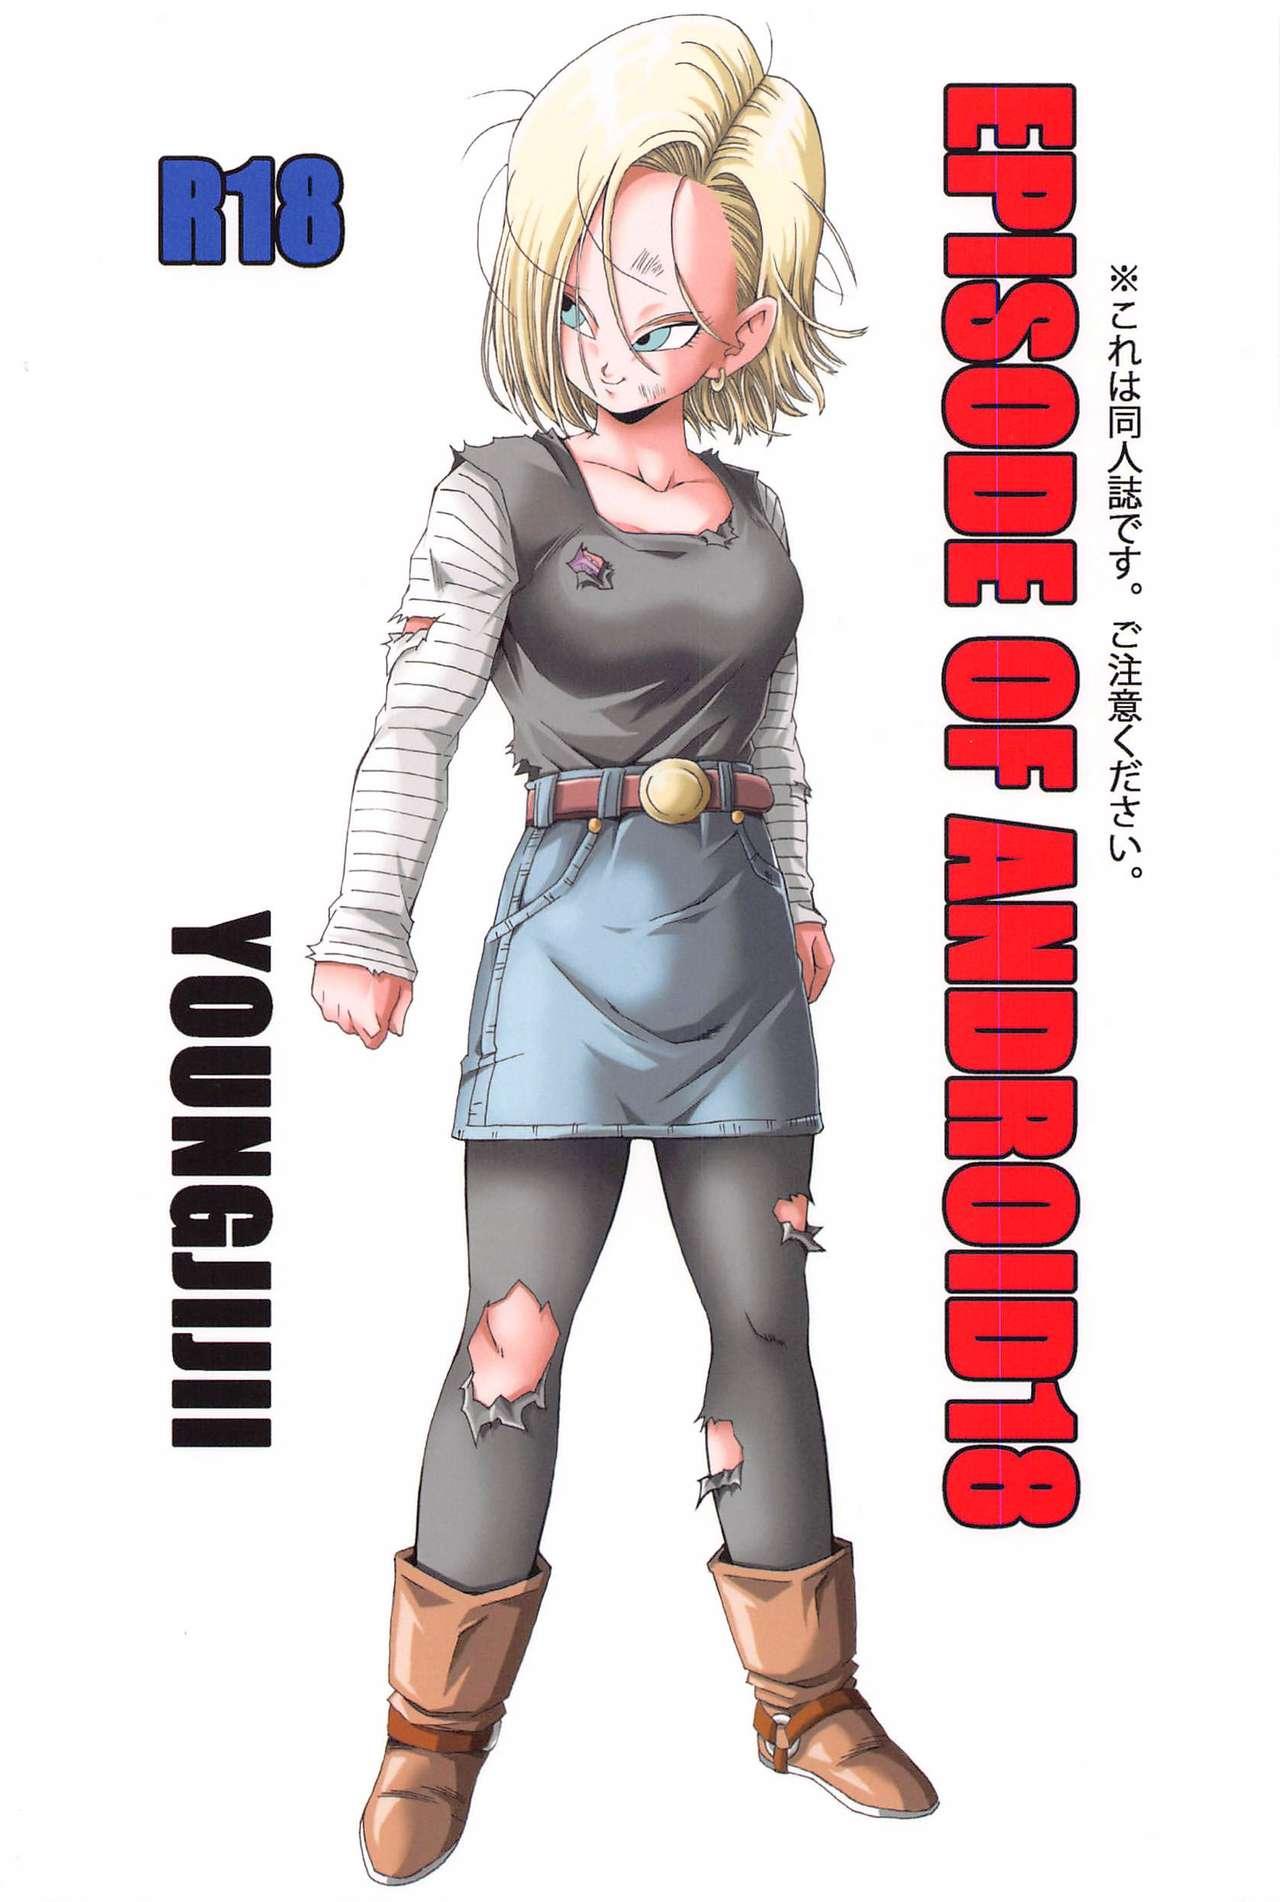 EPISODE OF ANDROID18 41